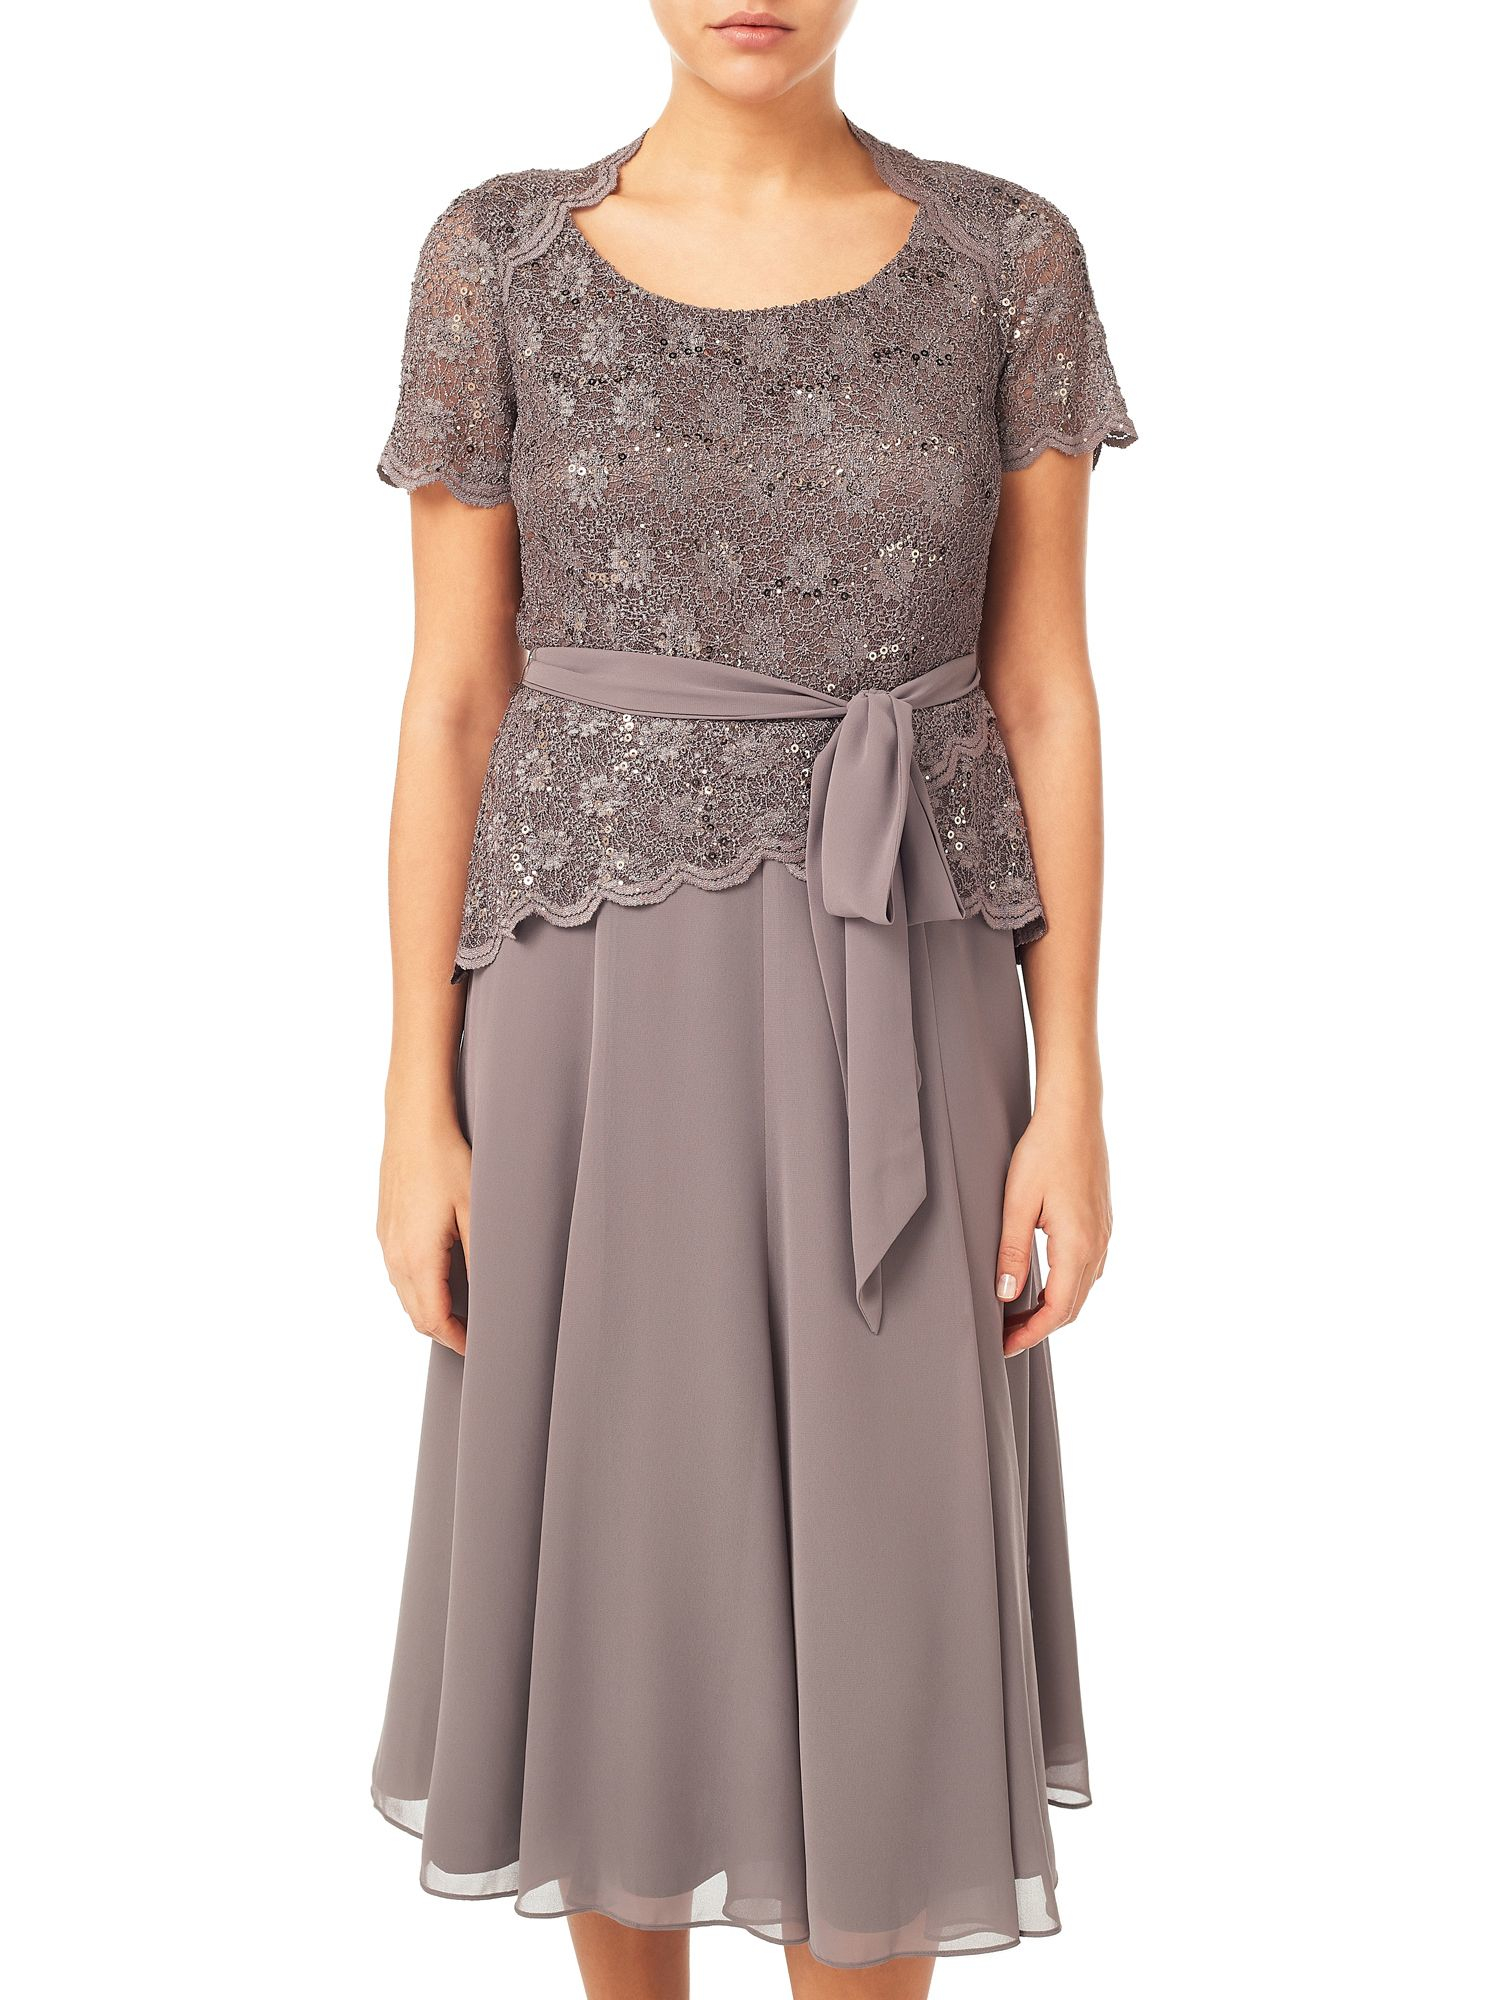 Jacques Vert Lace Top Chiffon Dress in Brown - Lyst